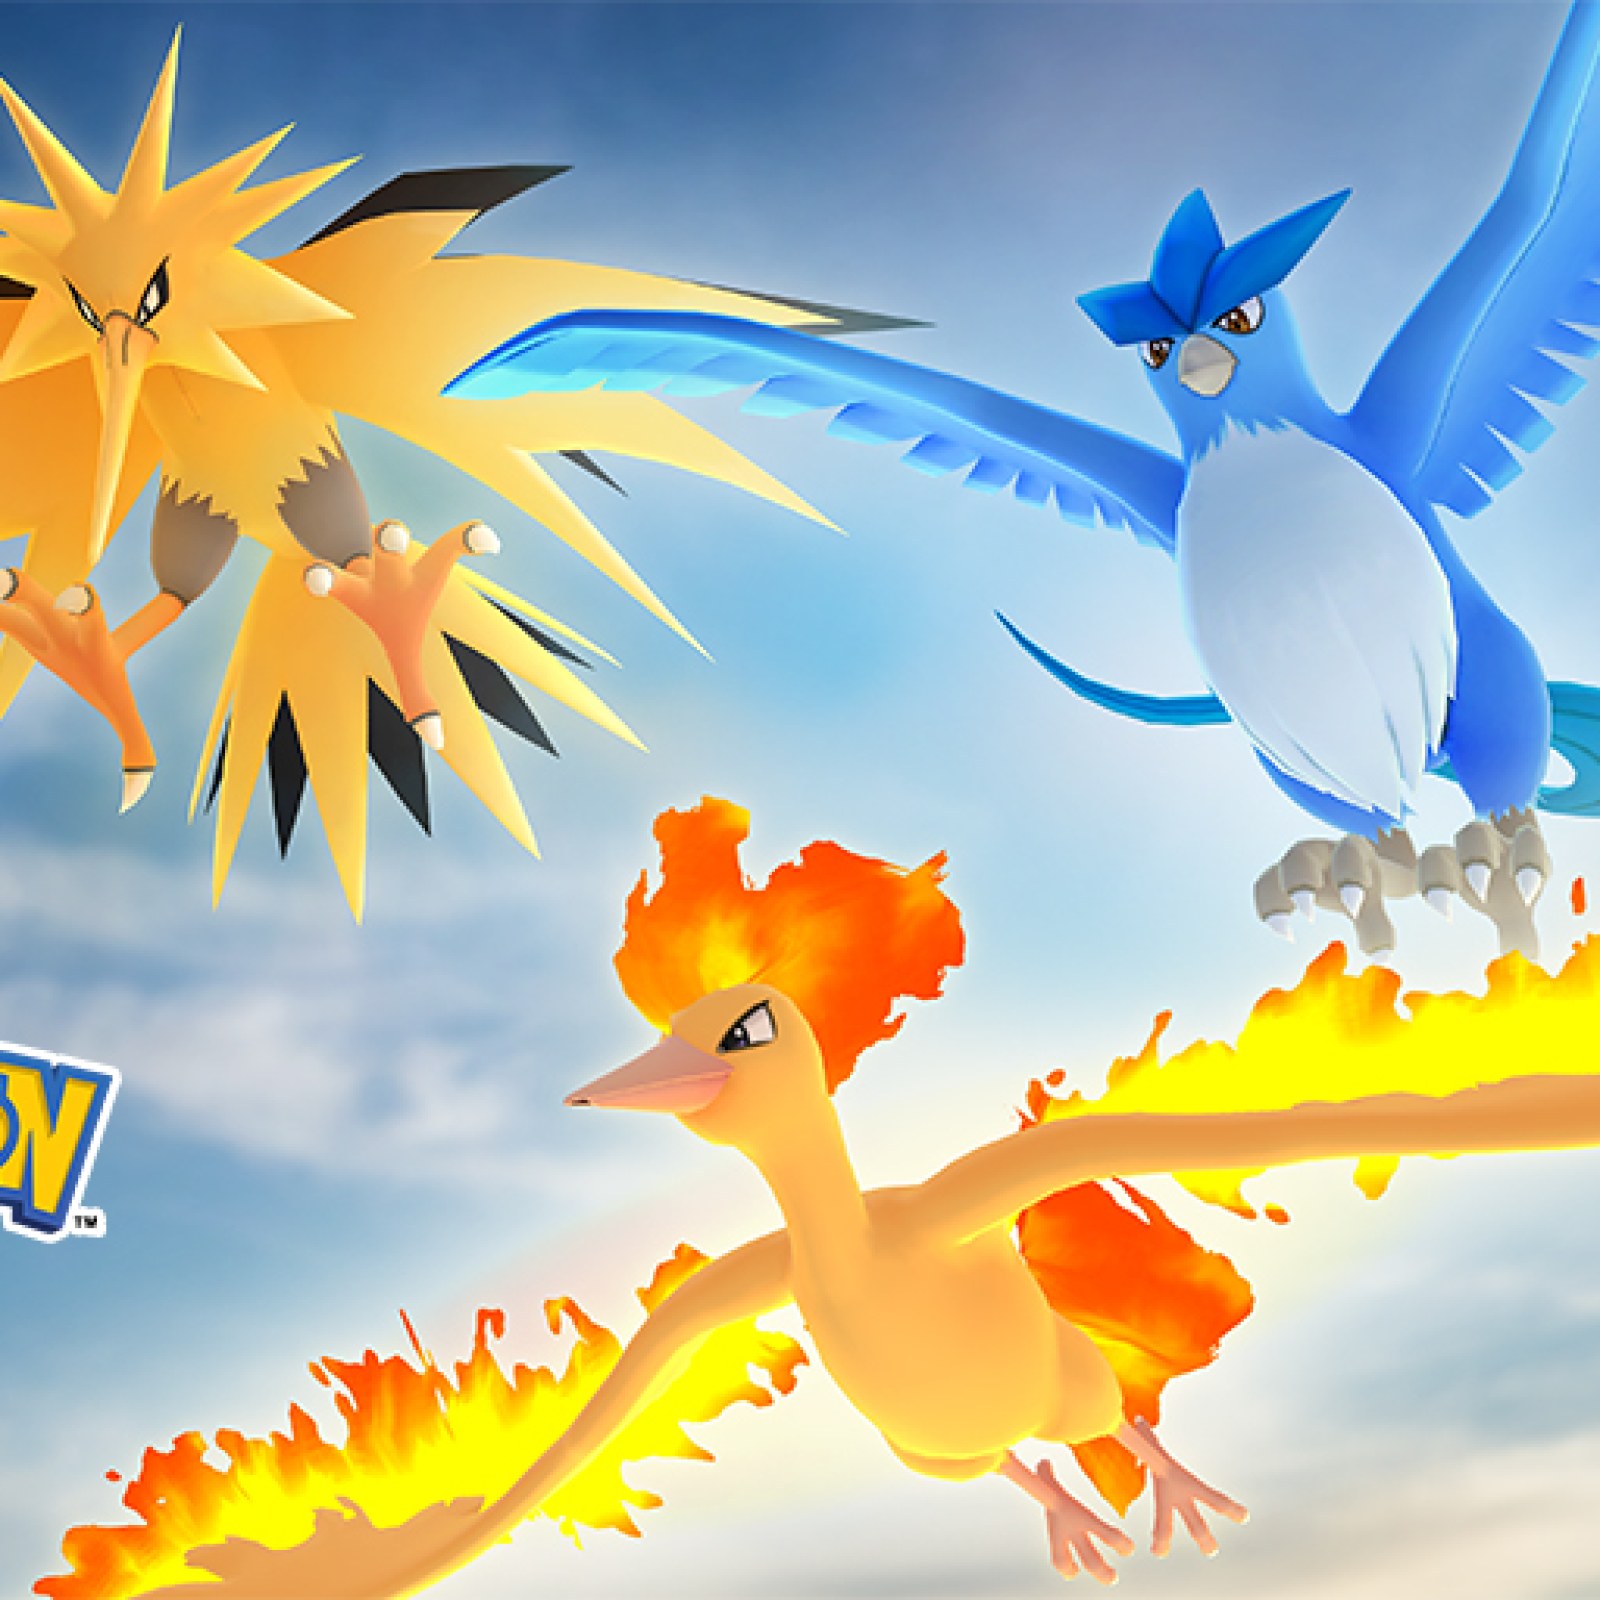 Pokemon GO update brings Zapdos - here's how to capture the legendary bird  - all you need to know